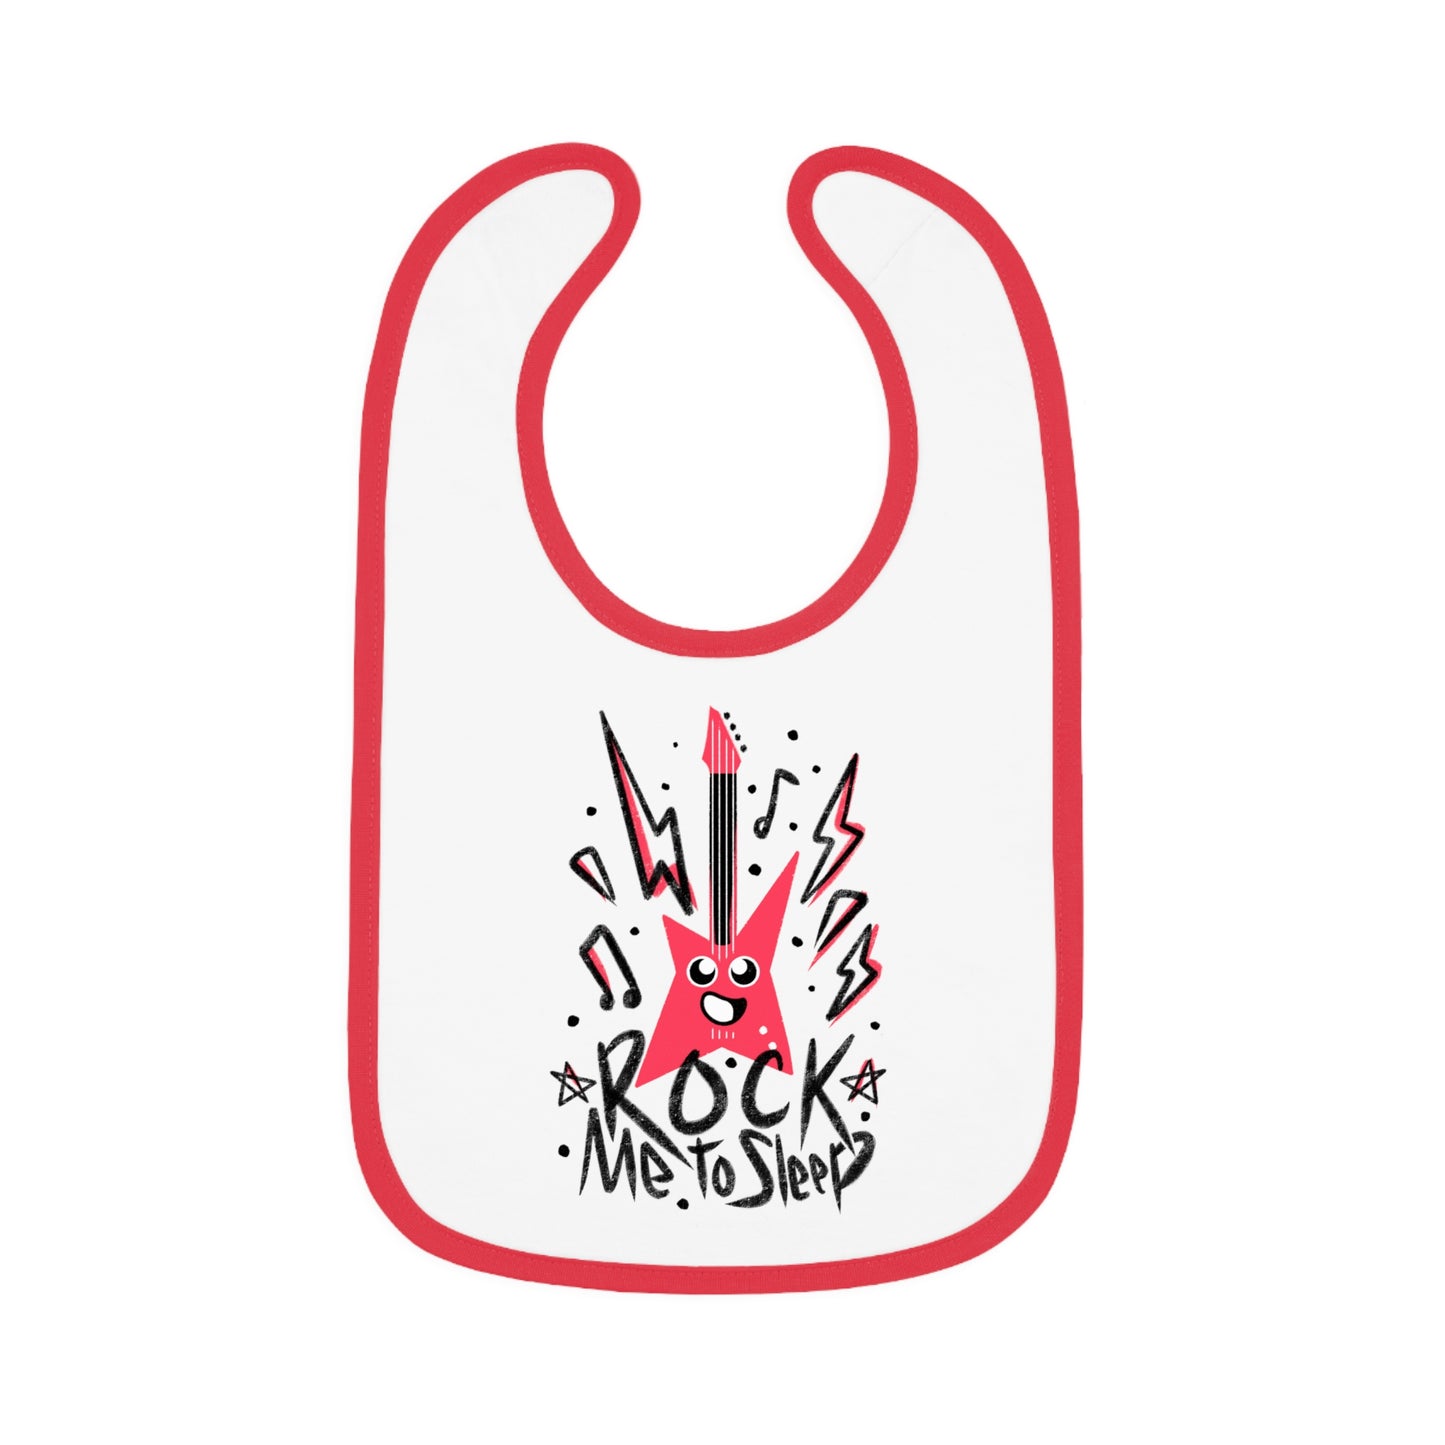 Rock Me To Sleep - Funny Rock Music Bib Gift for Newborn or New Parents